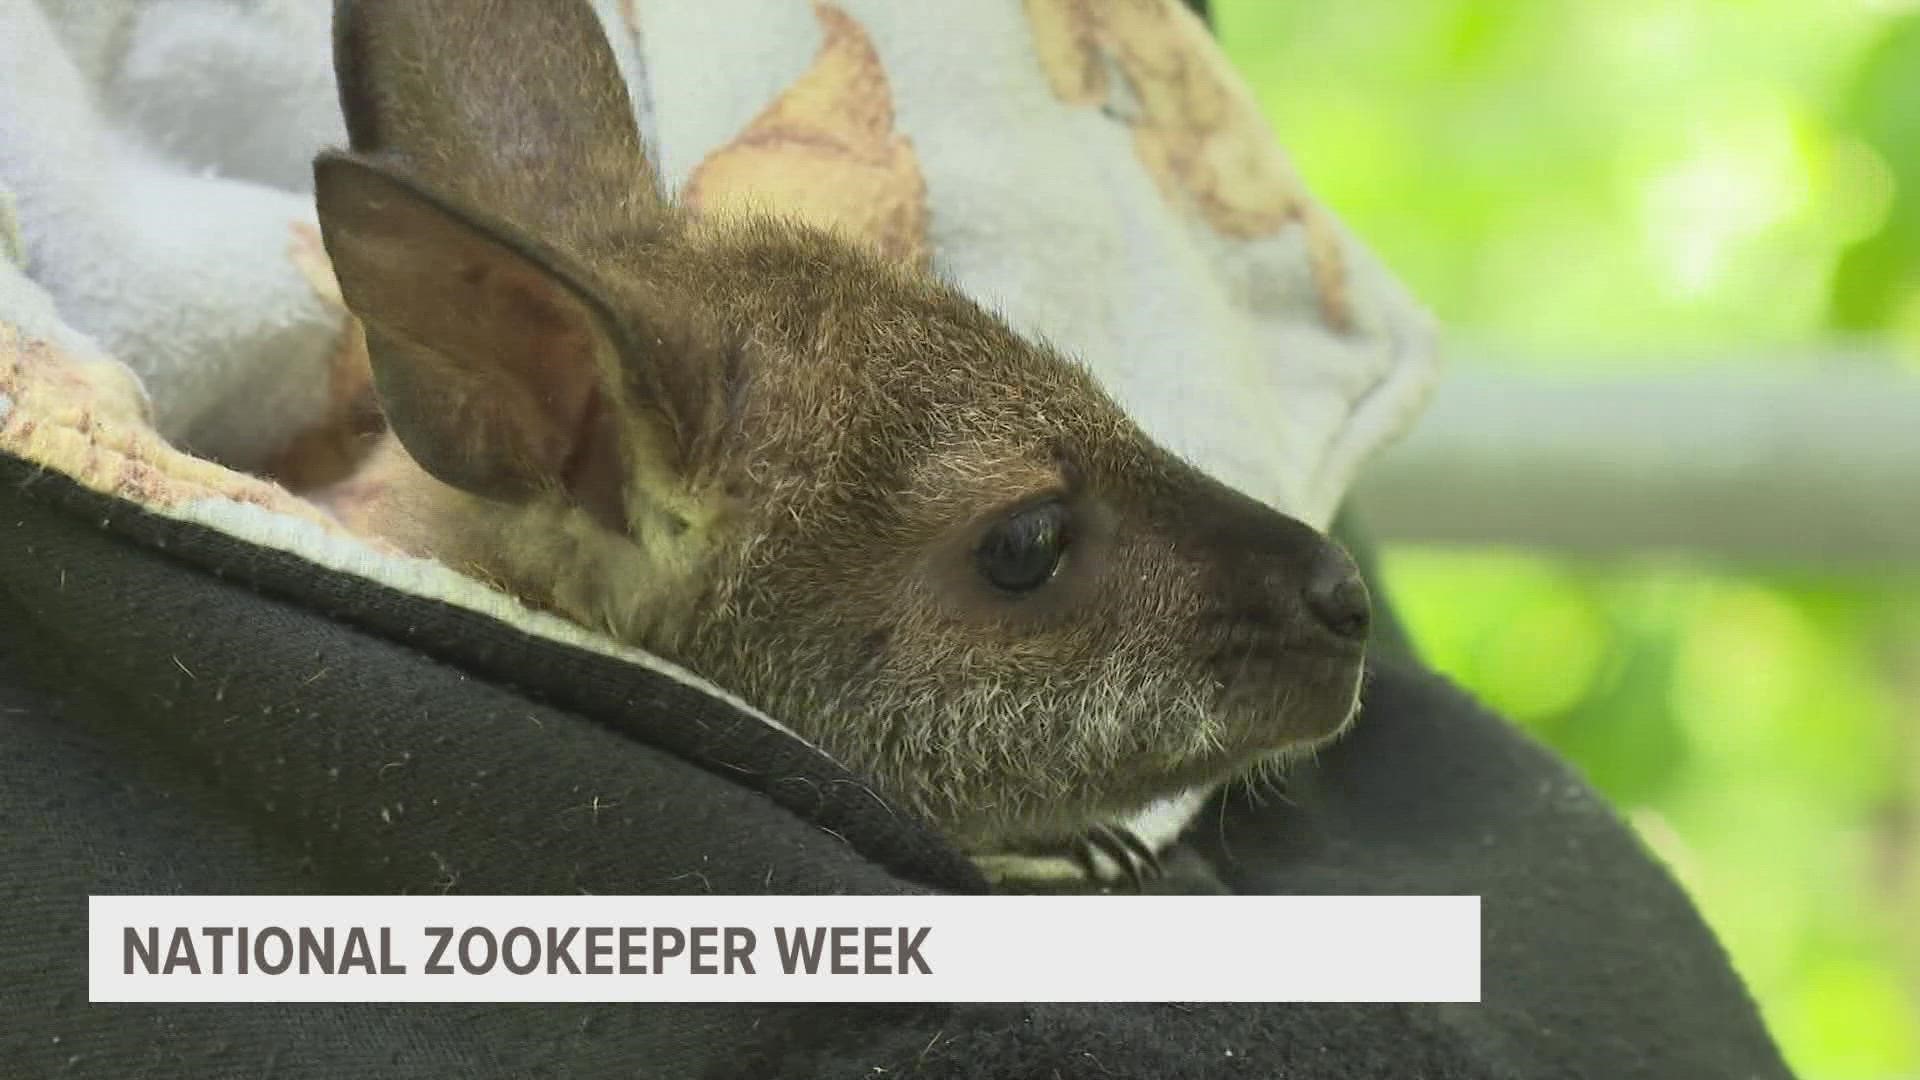 Zookeepers put in a lot of effort to ensure that animals in their zoo have the best possible care and you can celebrate them this week by heading to a nearby zoo.